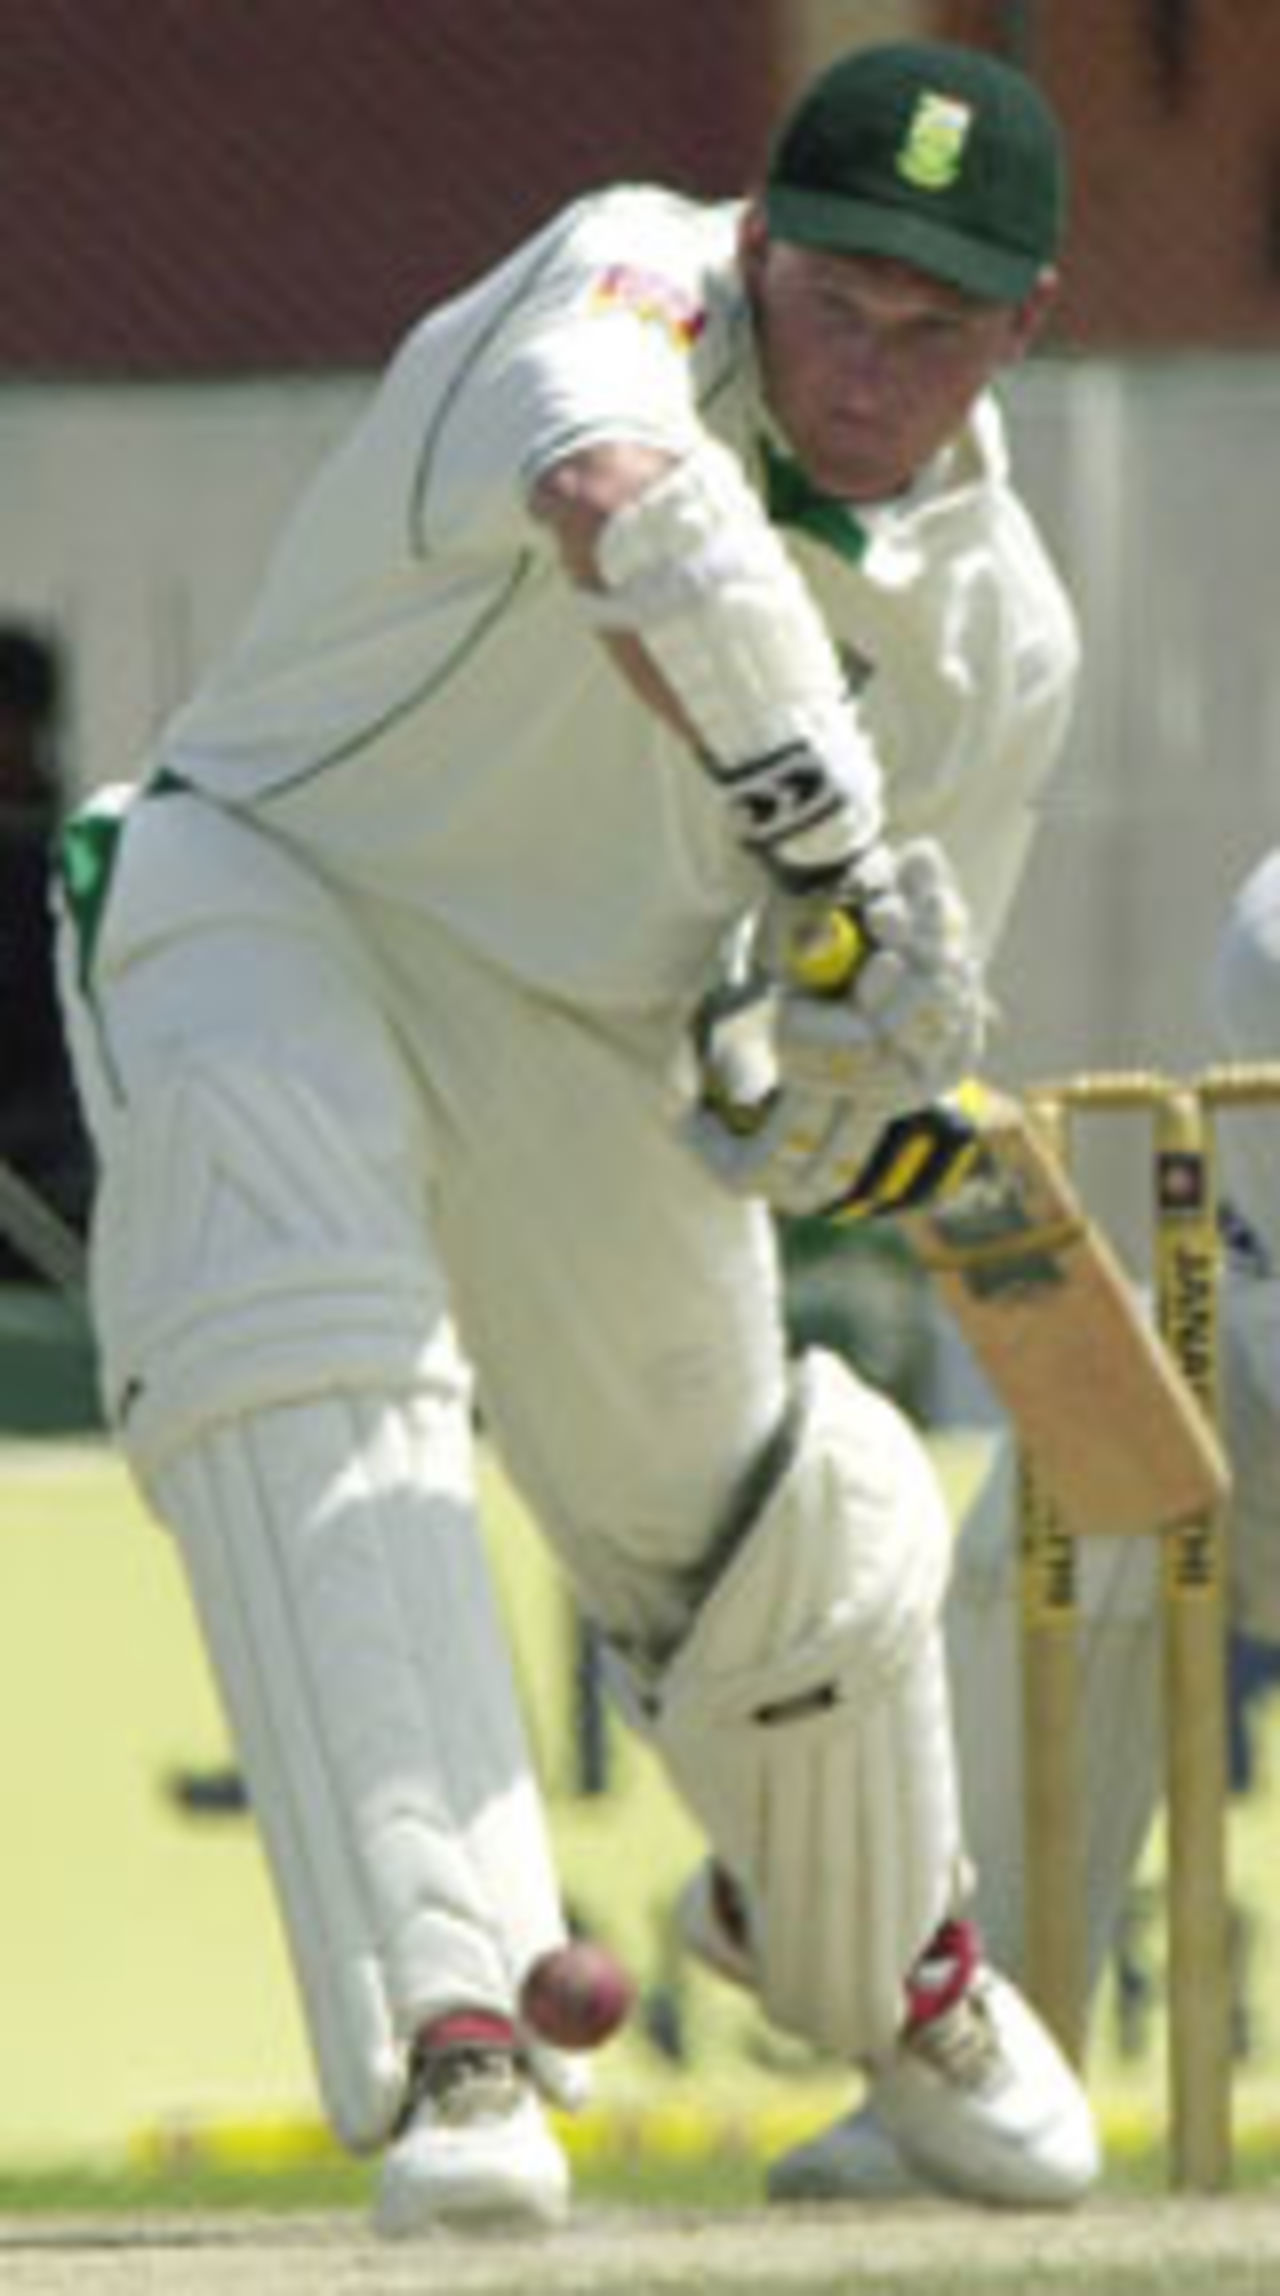 Graeme Smith top-scored for South Africa, South Africa v Sri Lanka, 2nd Test, Sinhalese Sports Club Ground, Colombo, August 13 2004